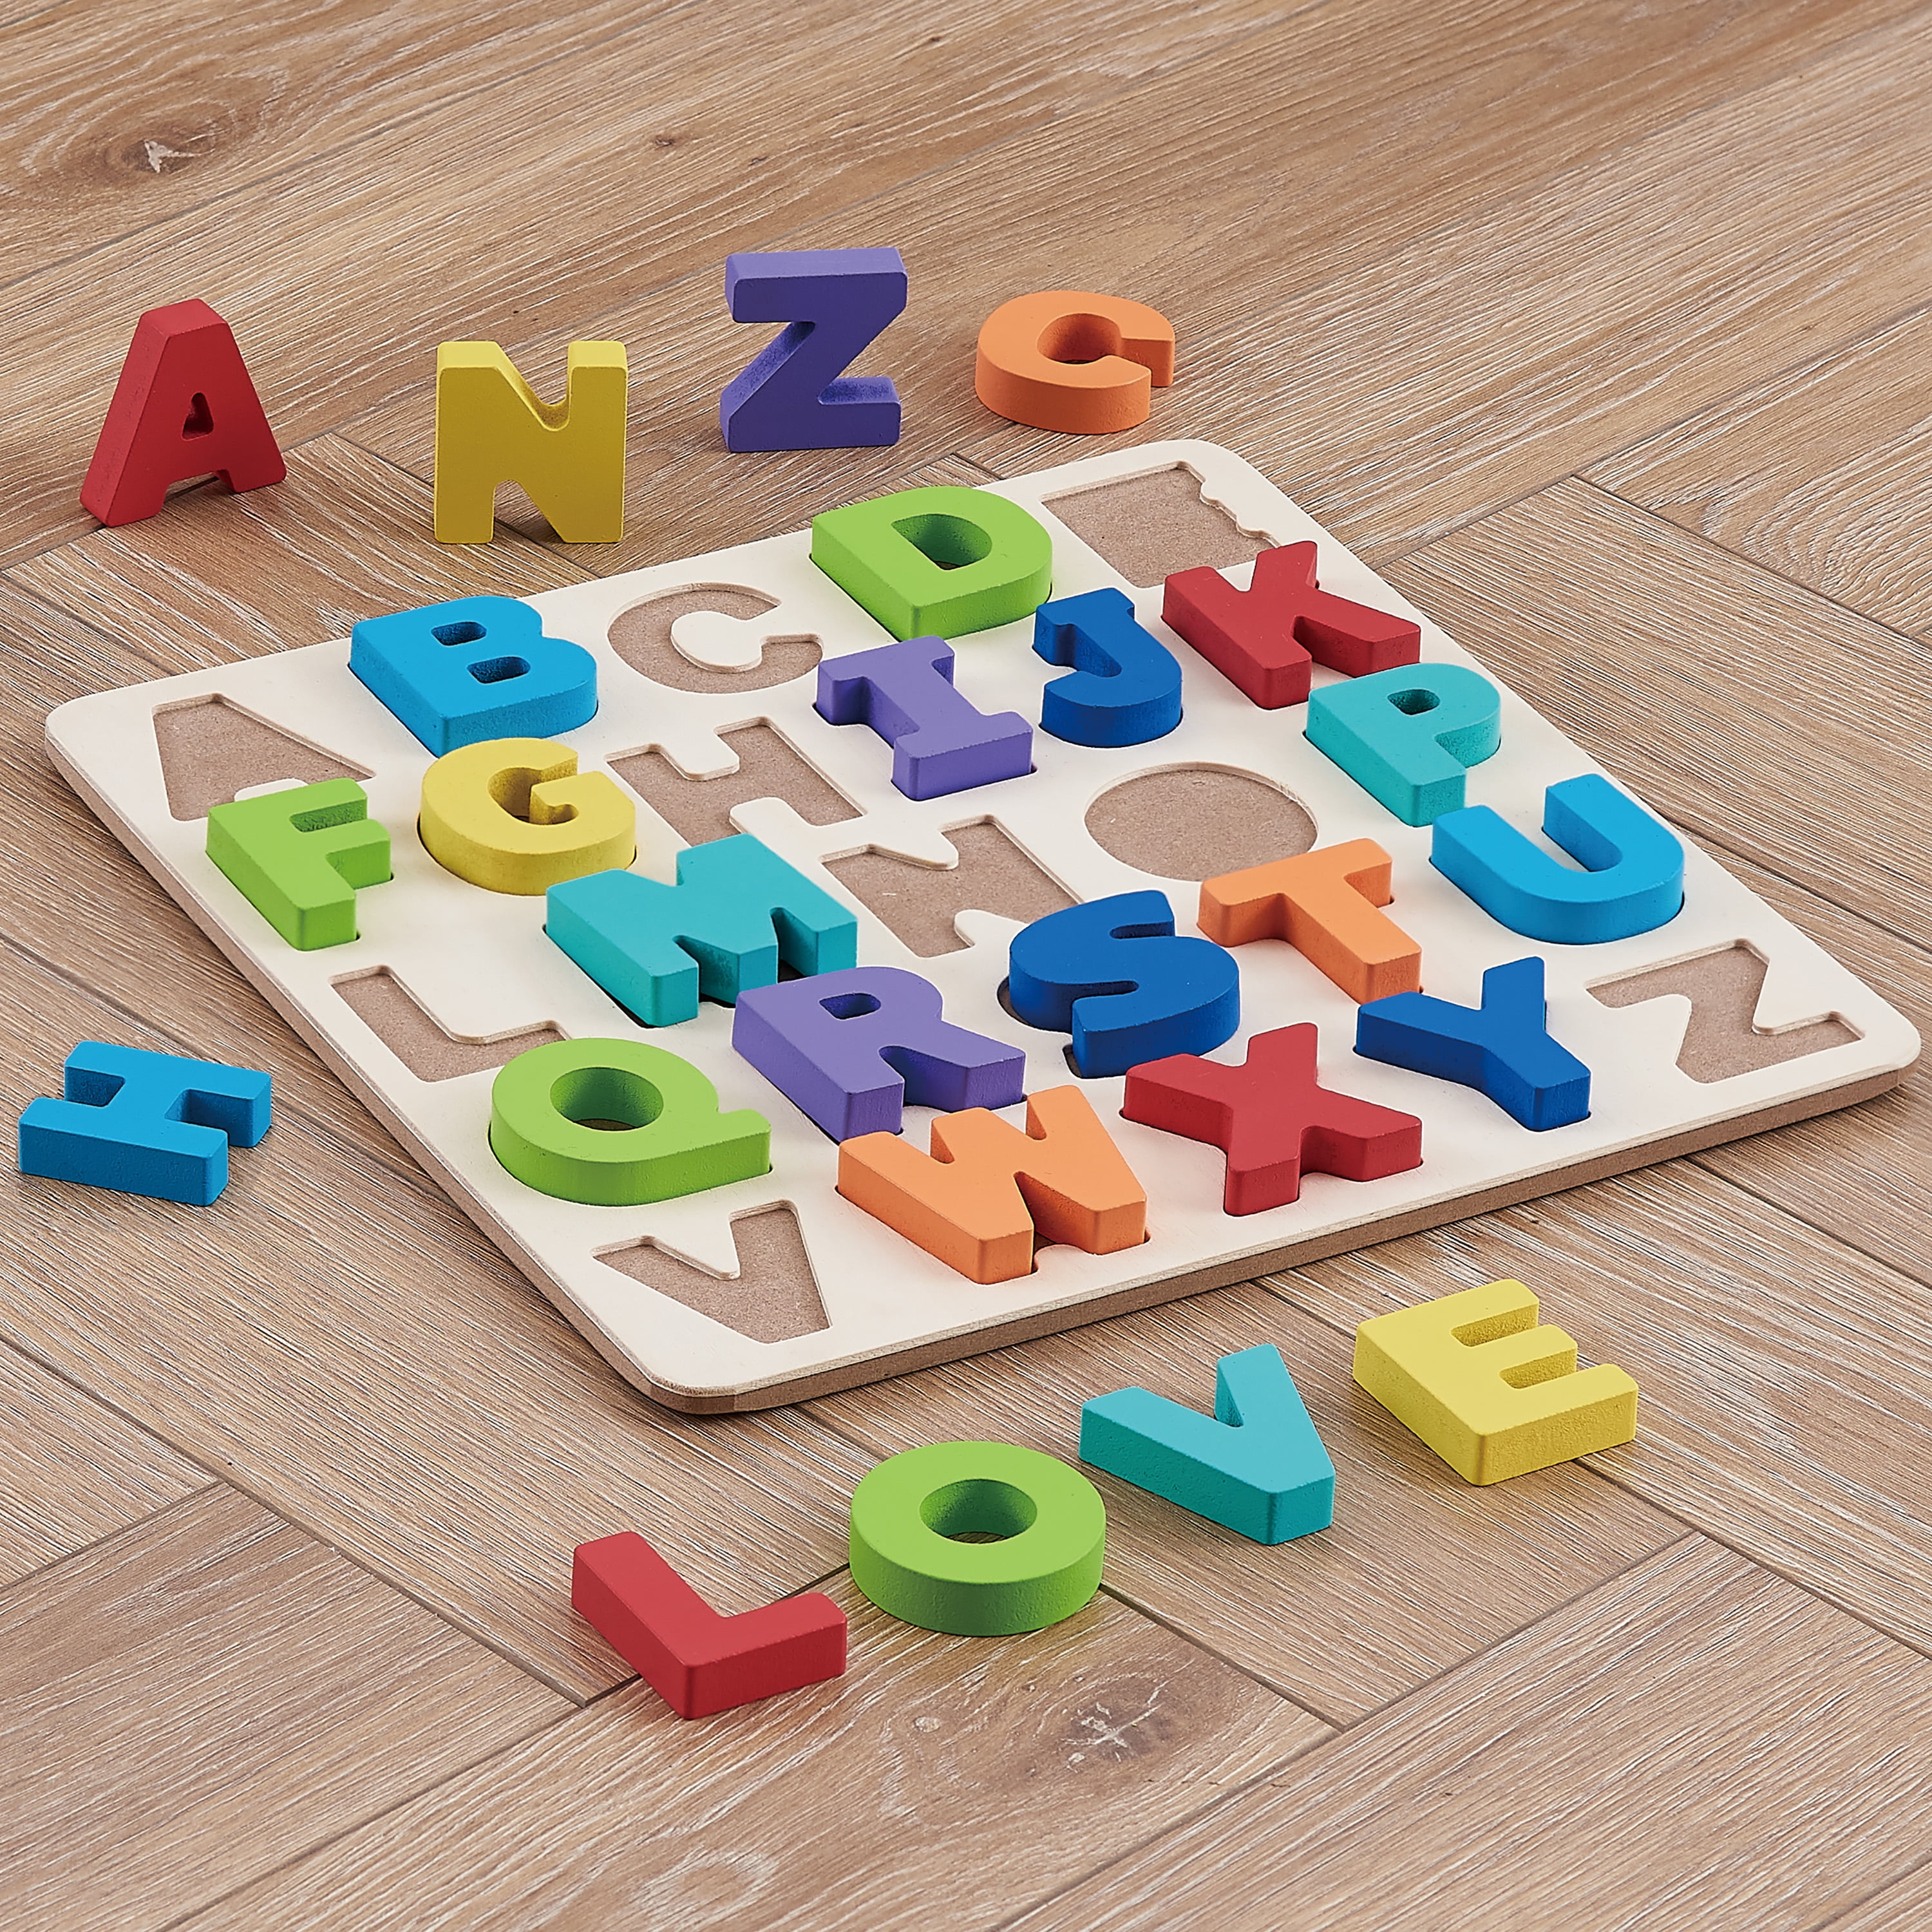 Spark Create Imagine Wooden Alphabet Puzzle Jigsaw Puzzle with 27 Pieces that provides young child with a great way of learning the alphabet in an easy and fun way